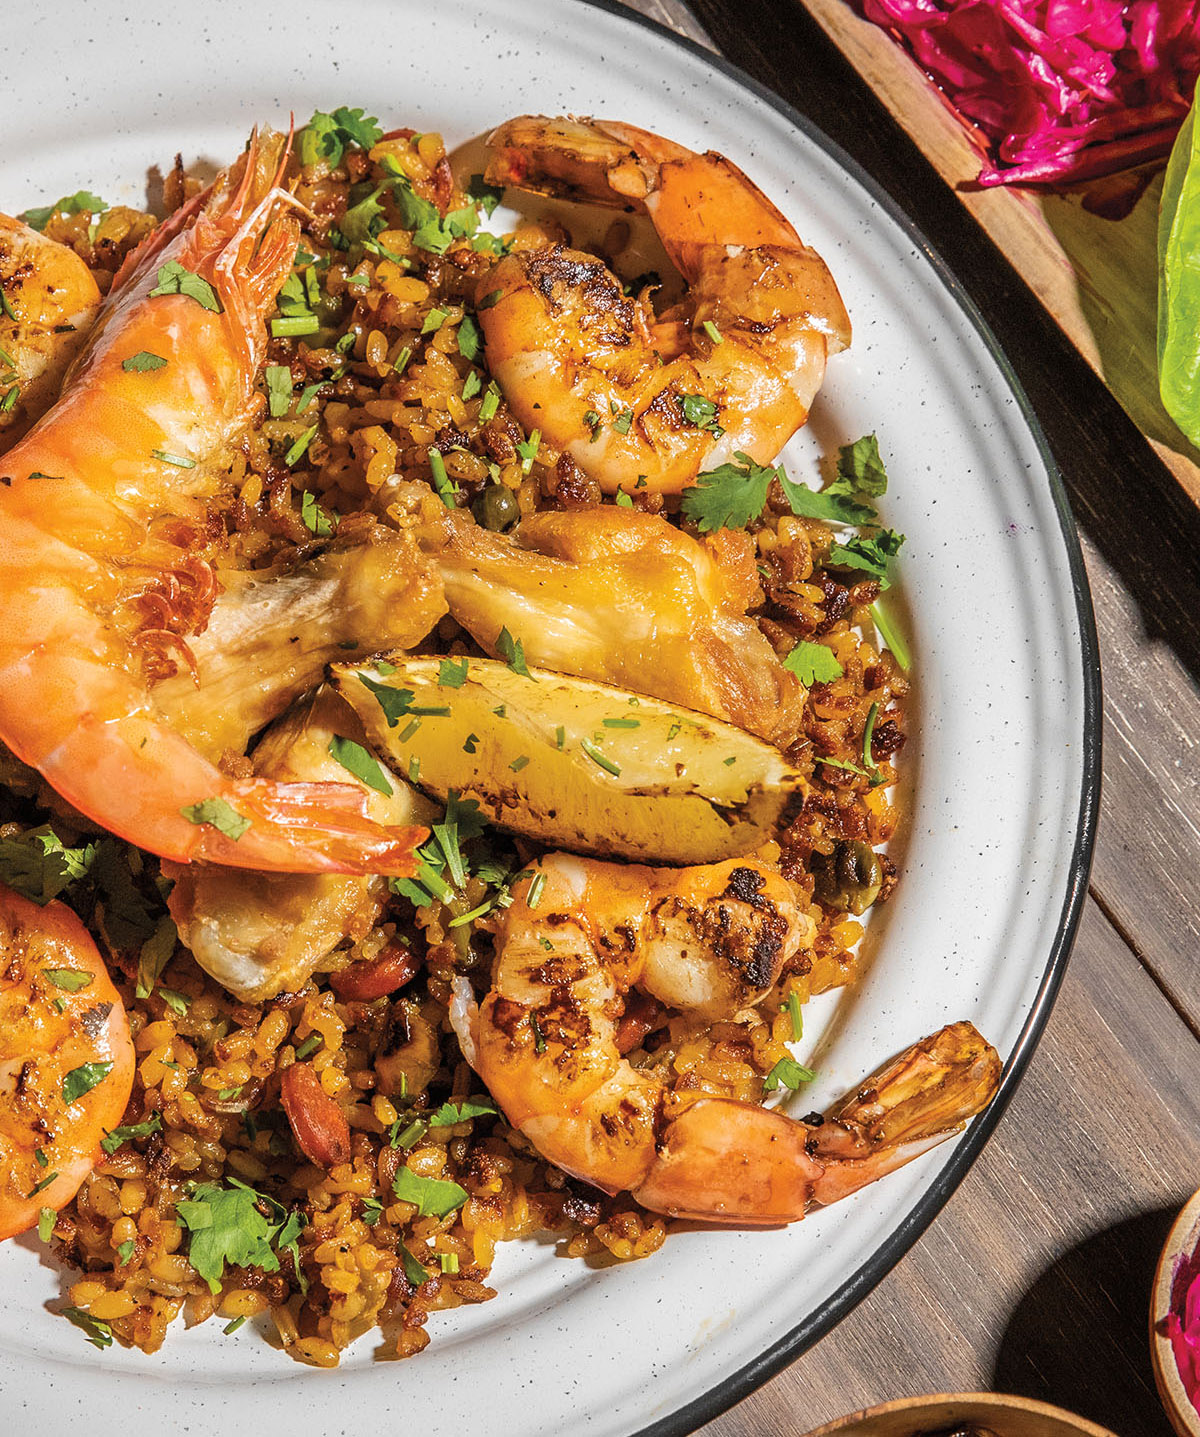 An overhead view of a plate of paella with shrimp and rice